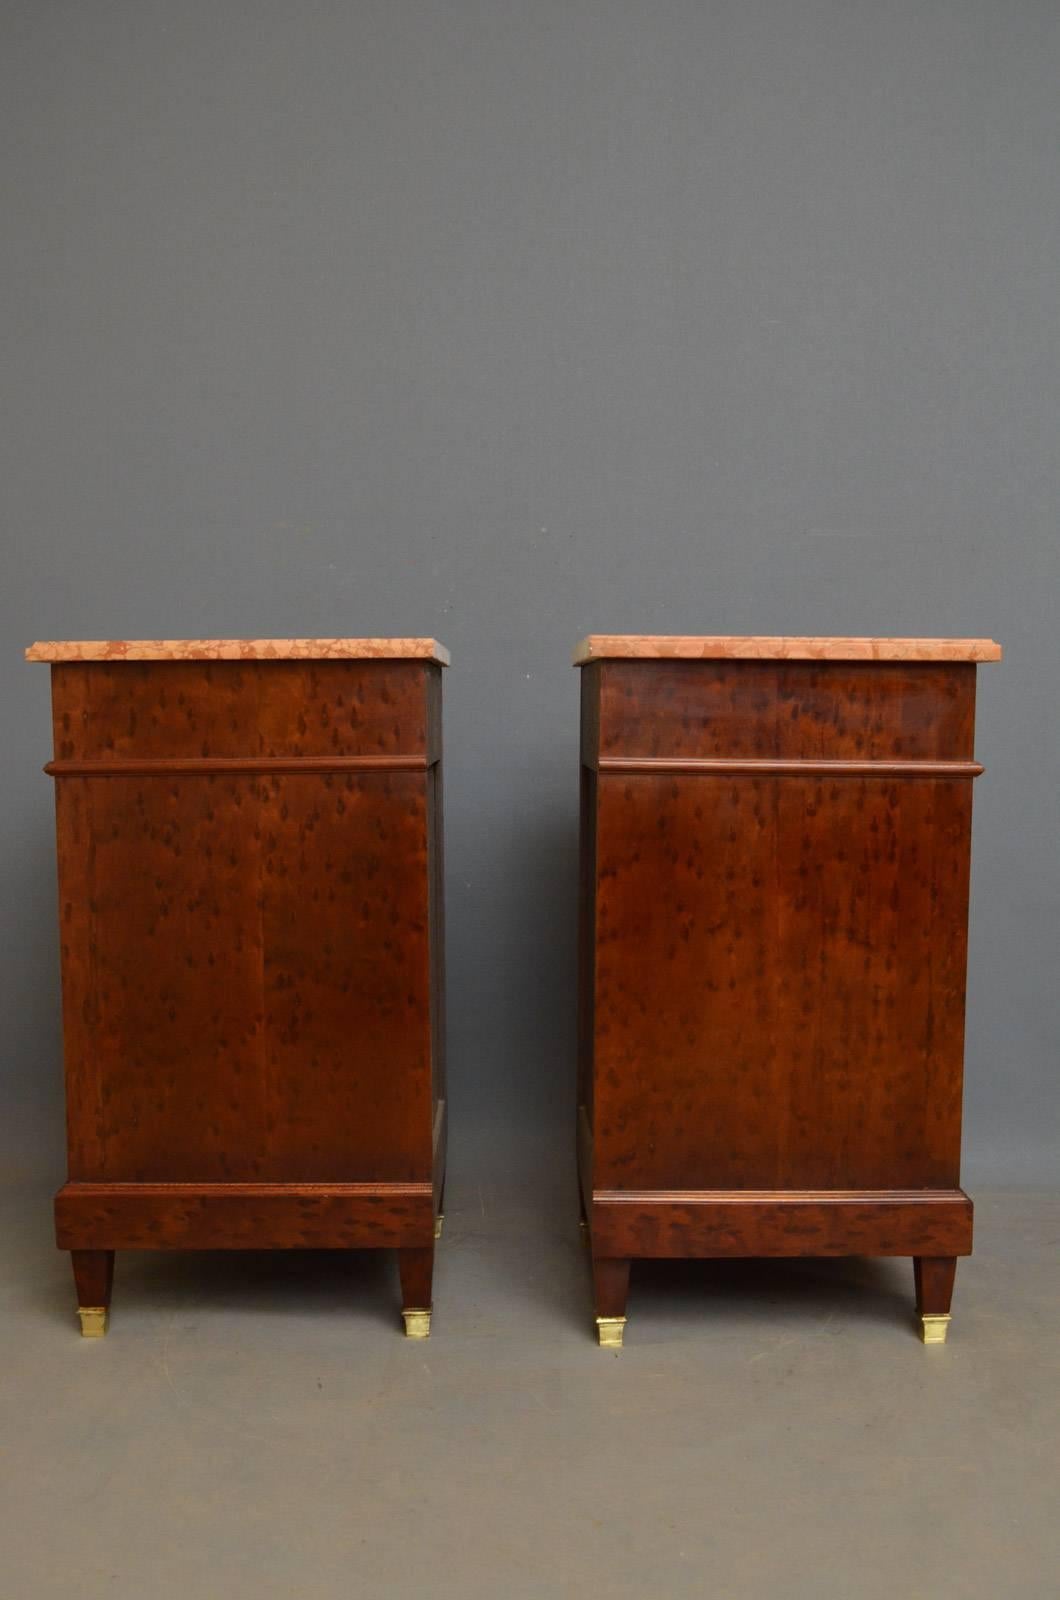 Marble Pair of Antique Bedside Cabinets